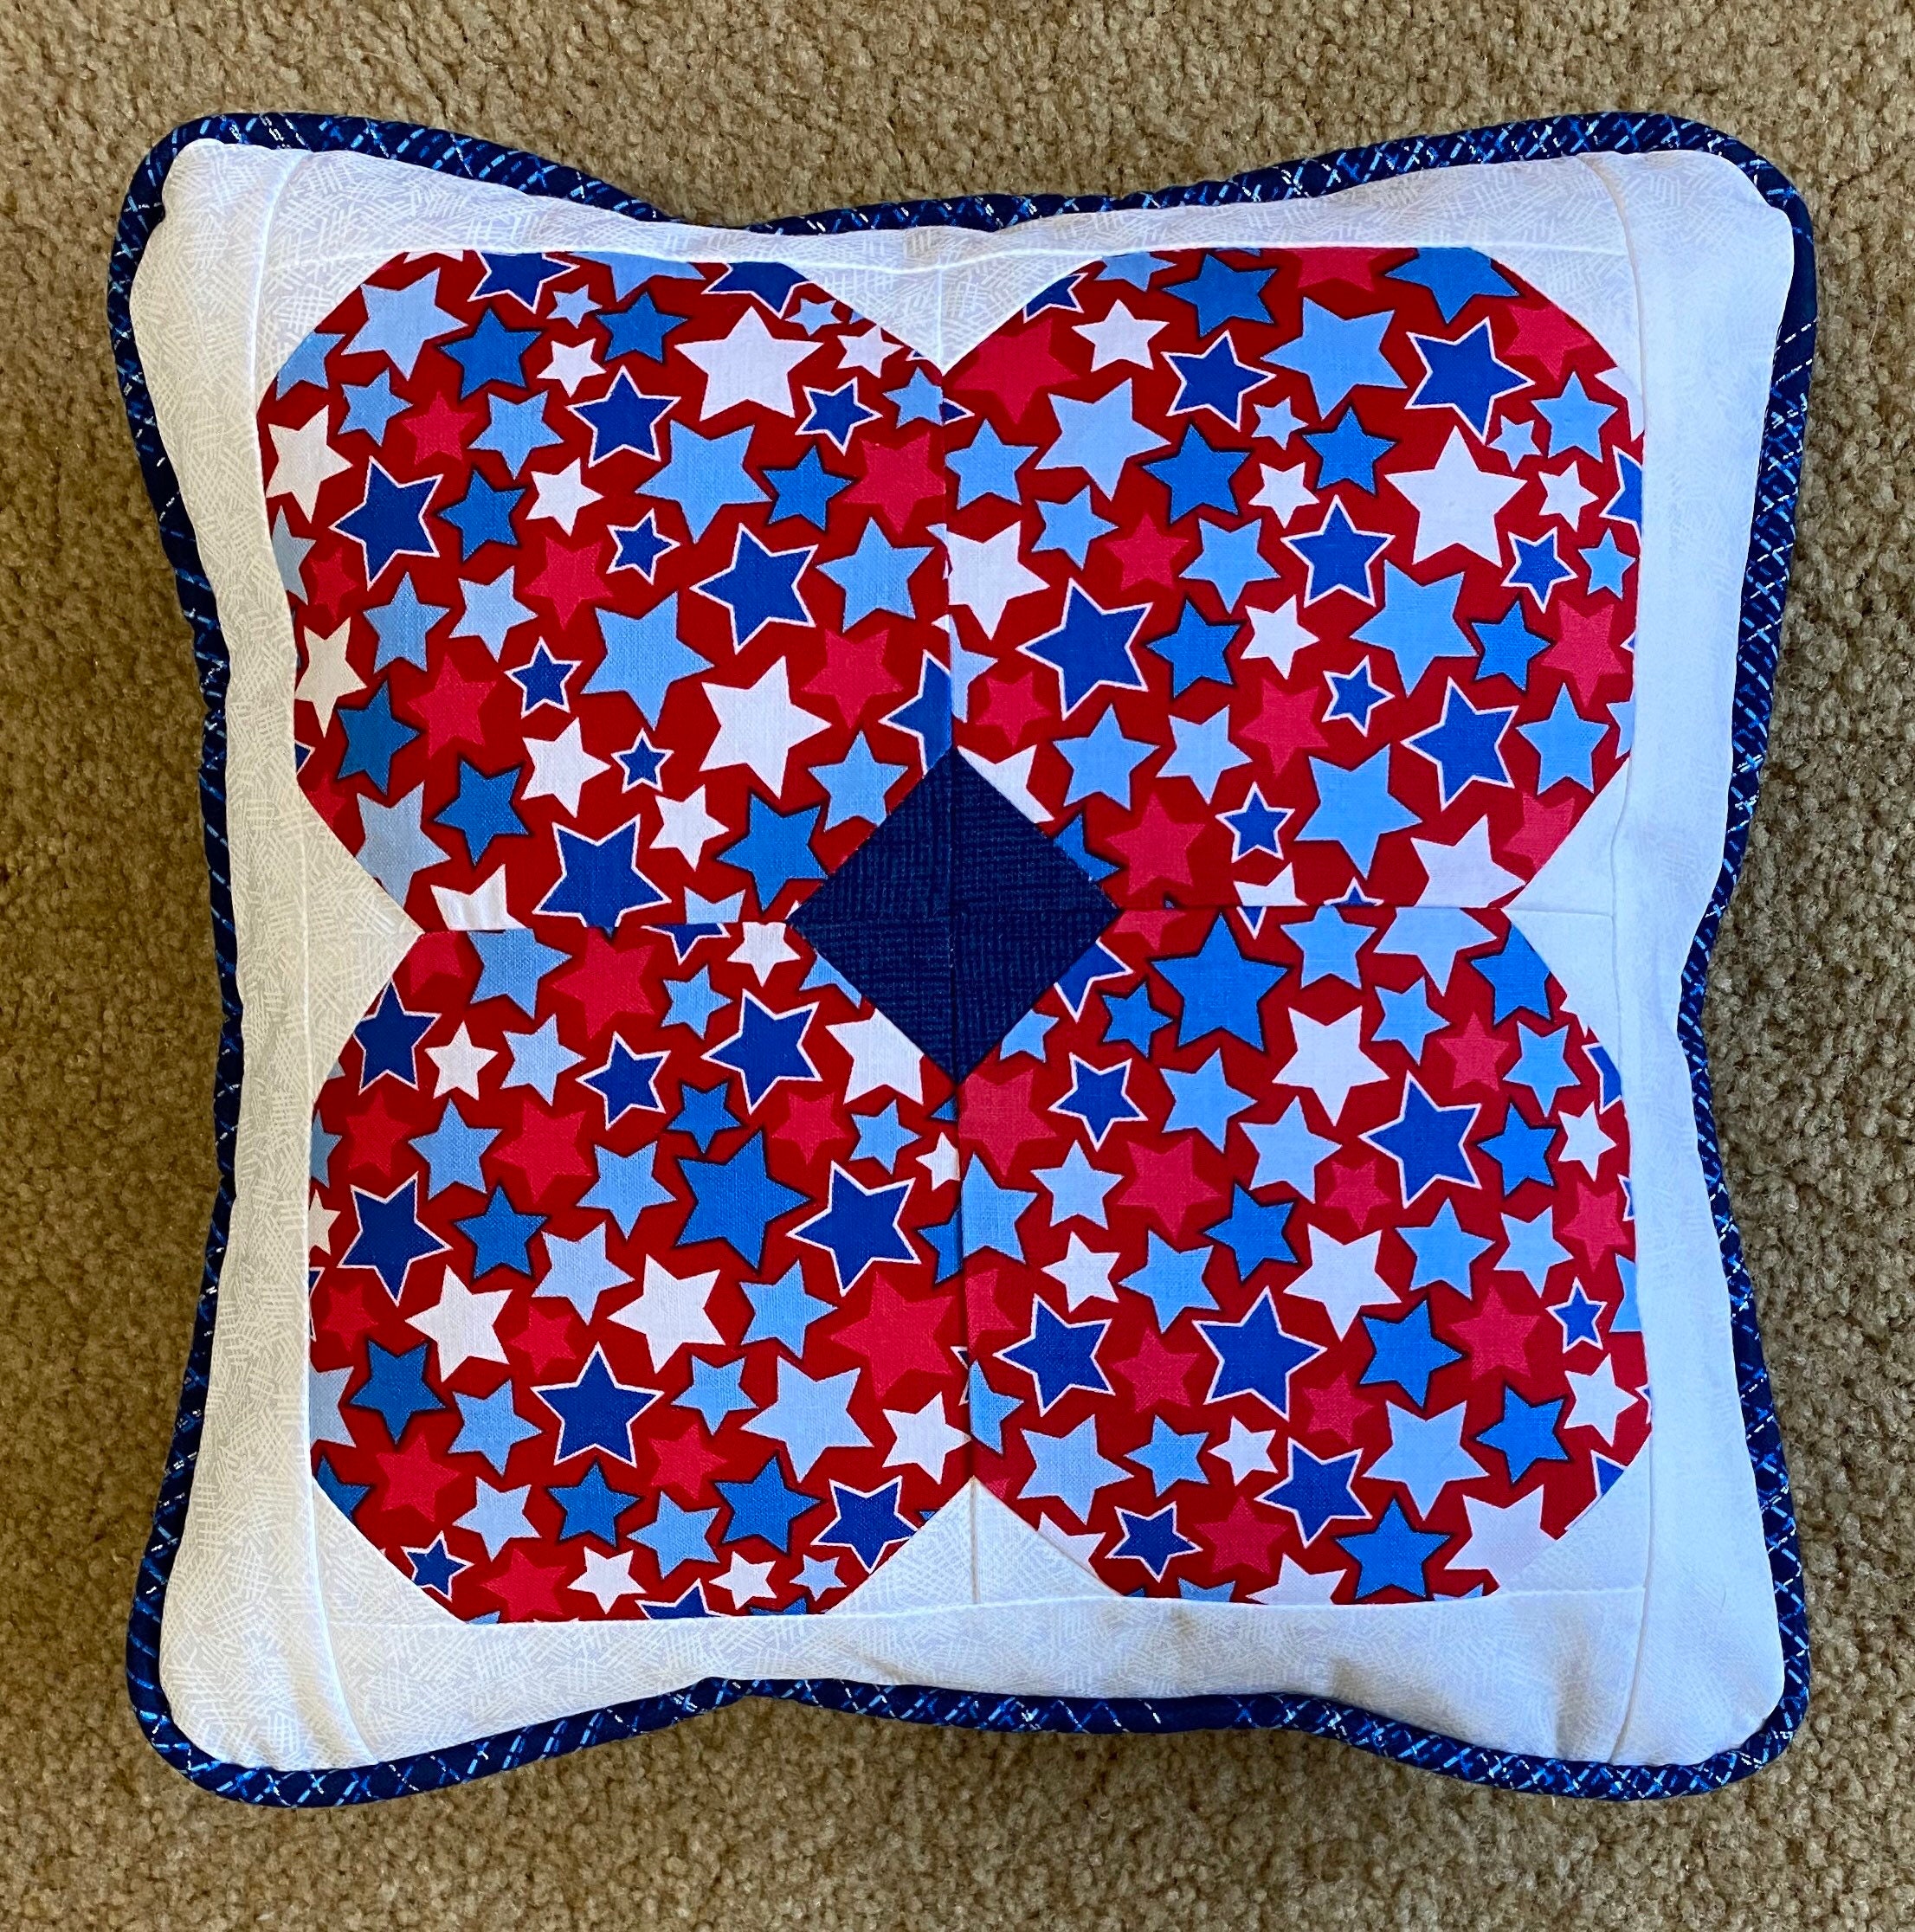 Red white and blue 10 inch pillow (pillow form not included)